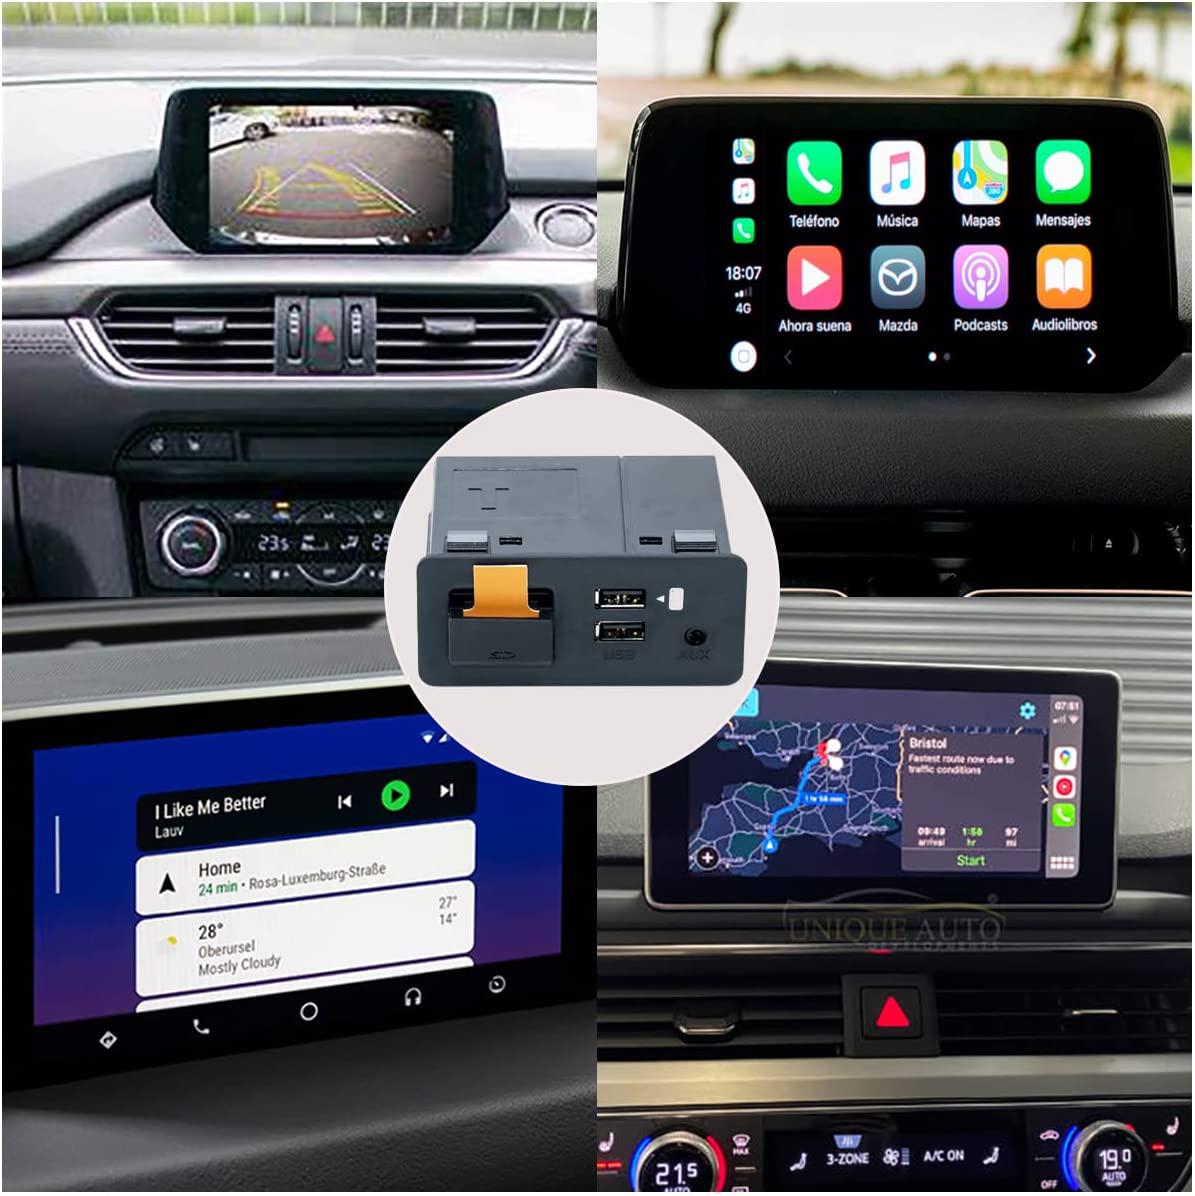 SDonestep, MAZDA Carplay, SDonestep Apple Carplay Adapter Compatible with Mazda CX3/CX5/CX9/MX5/mzd6 2014-2020, Fit for Carplay and Android Auto, TK78-66-9U0C Retrofit Kit Fits MZD Connect System, 00008FZ34